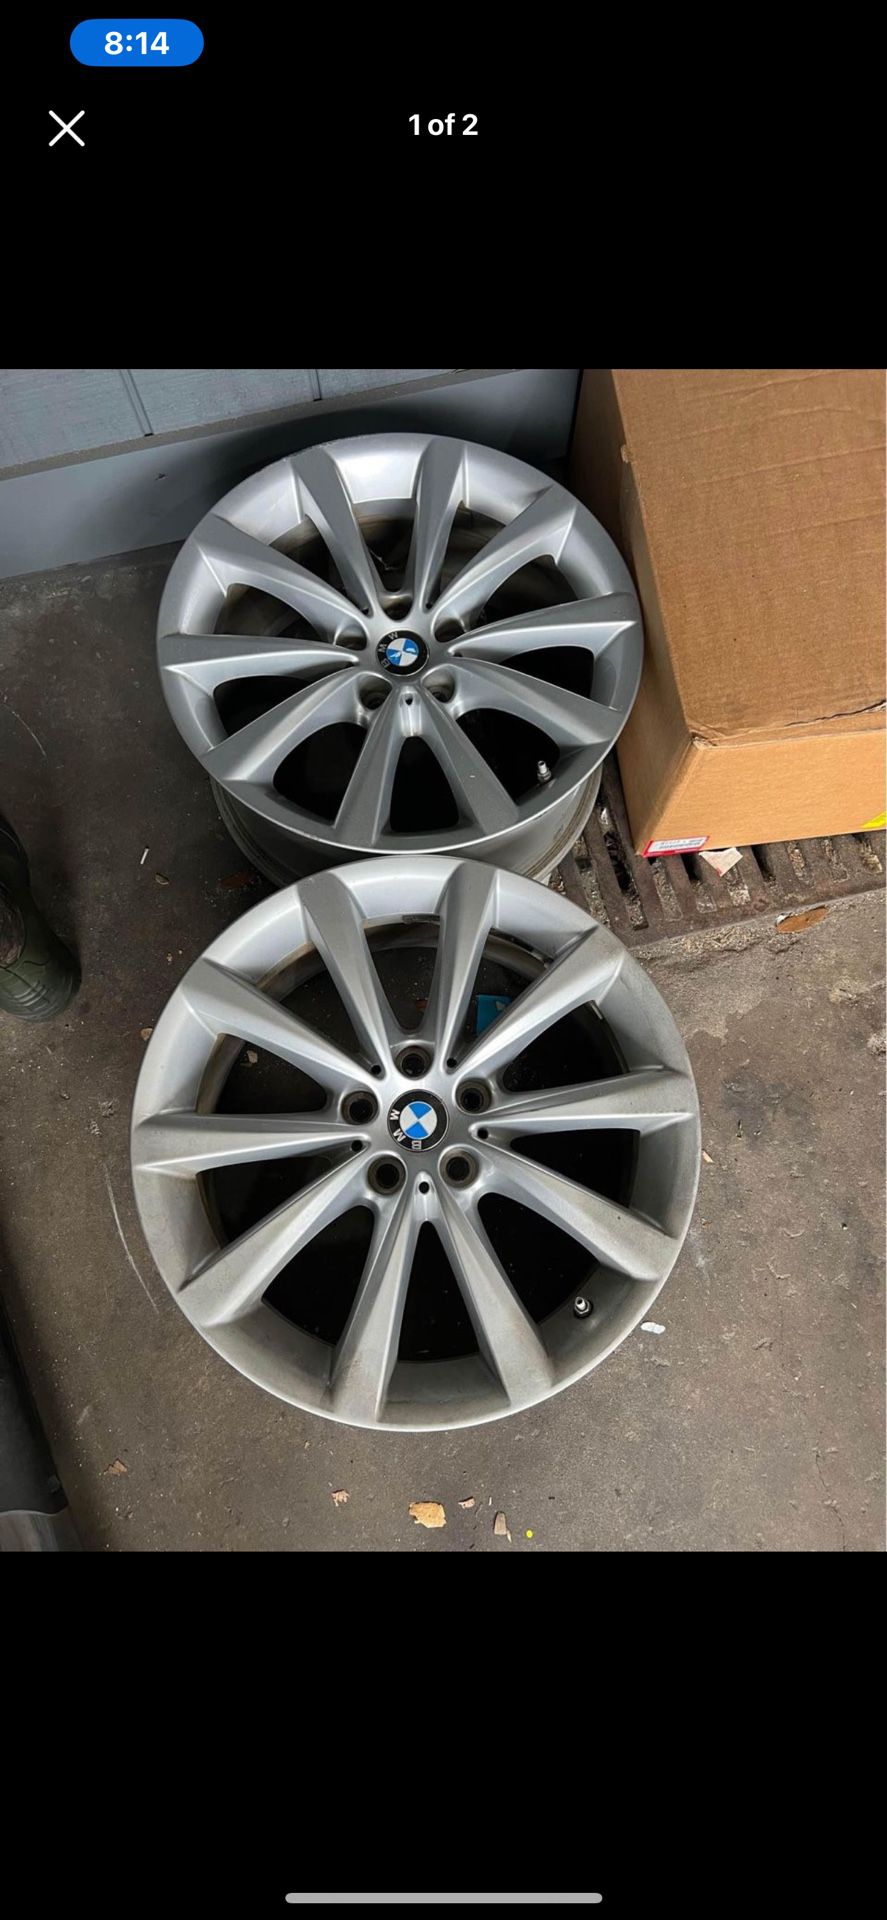 (4) BMW 3 SERIES FOR SALE SIZE 18INCH